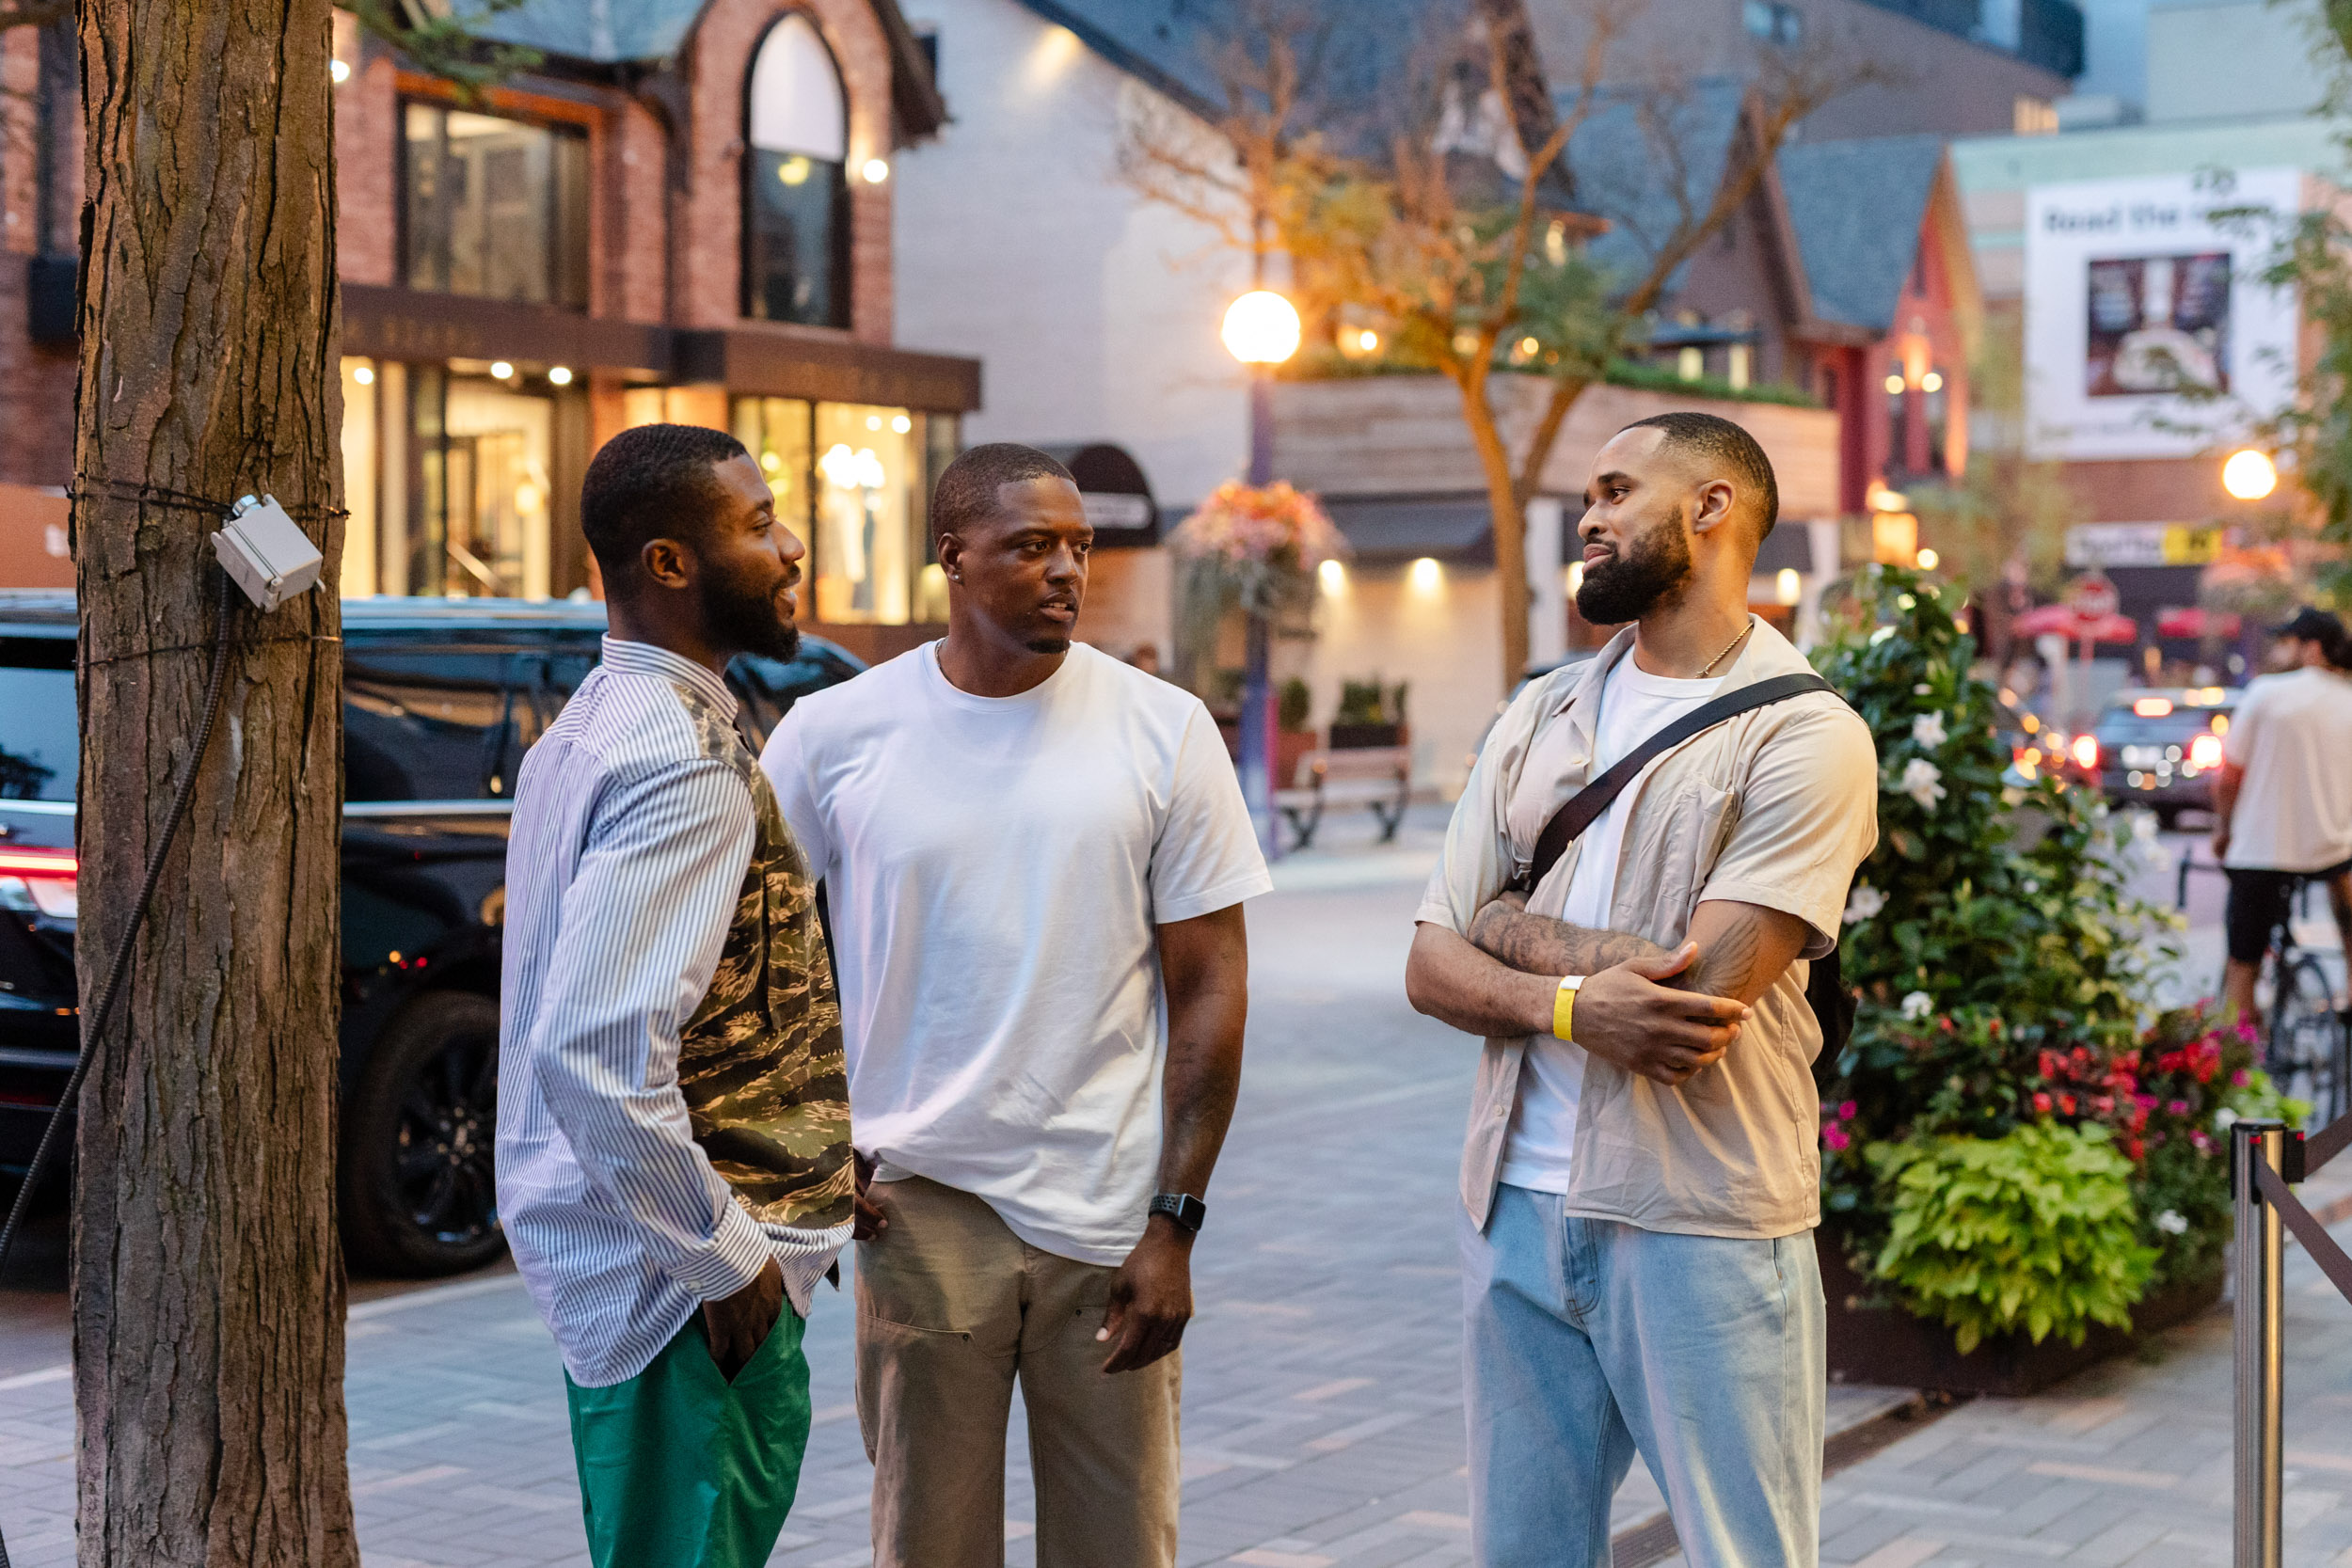 Three men standing on a sidewalk talking to each other